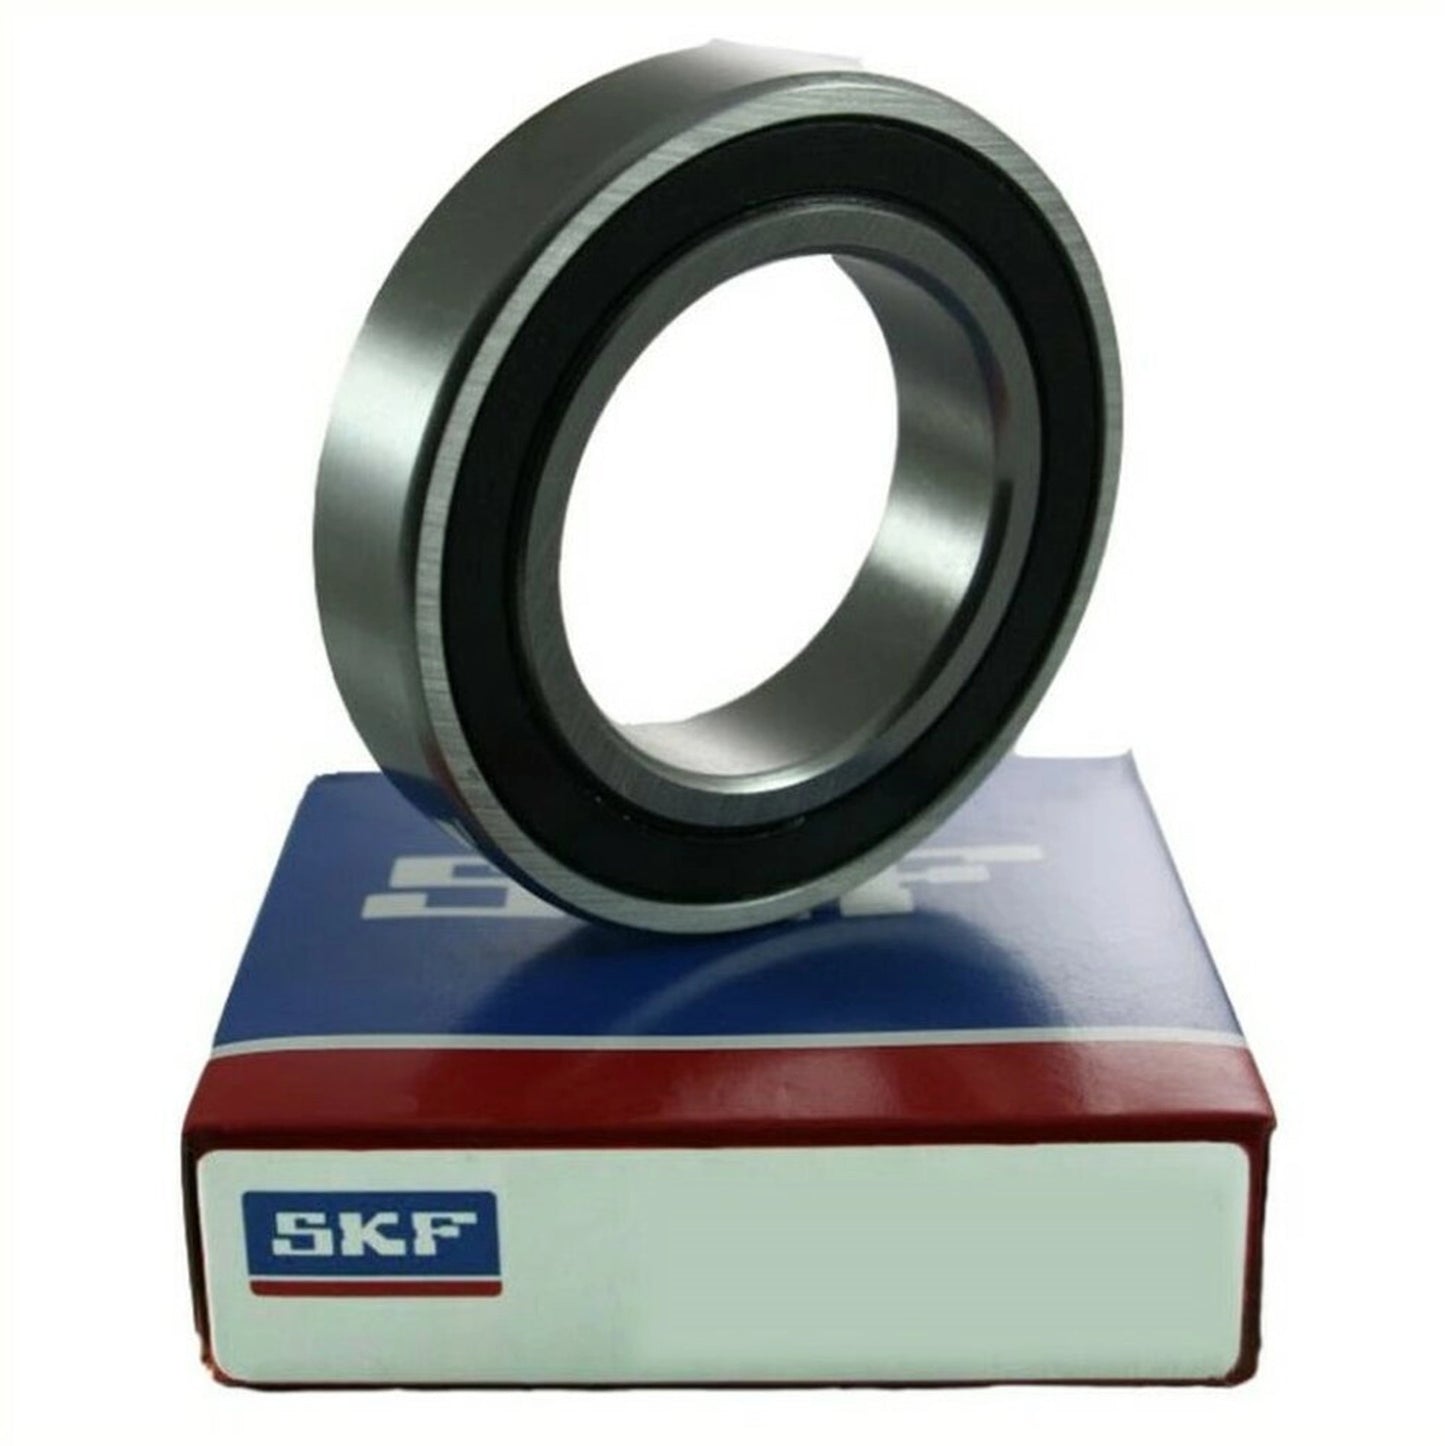 Lager 6307-2RS1 / C3 35x80x21 SKF